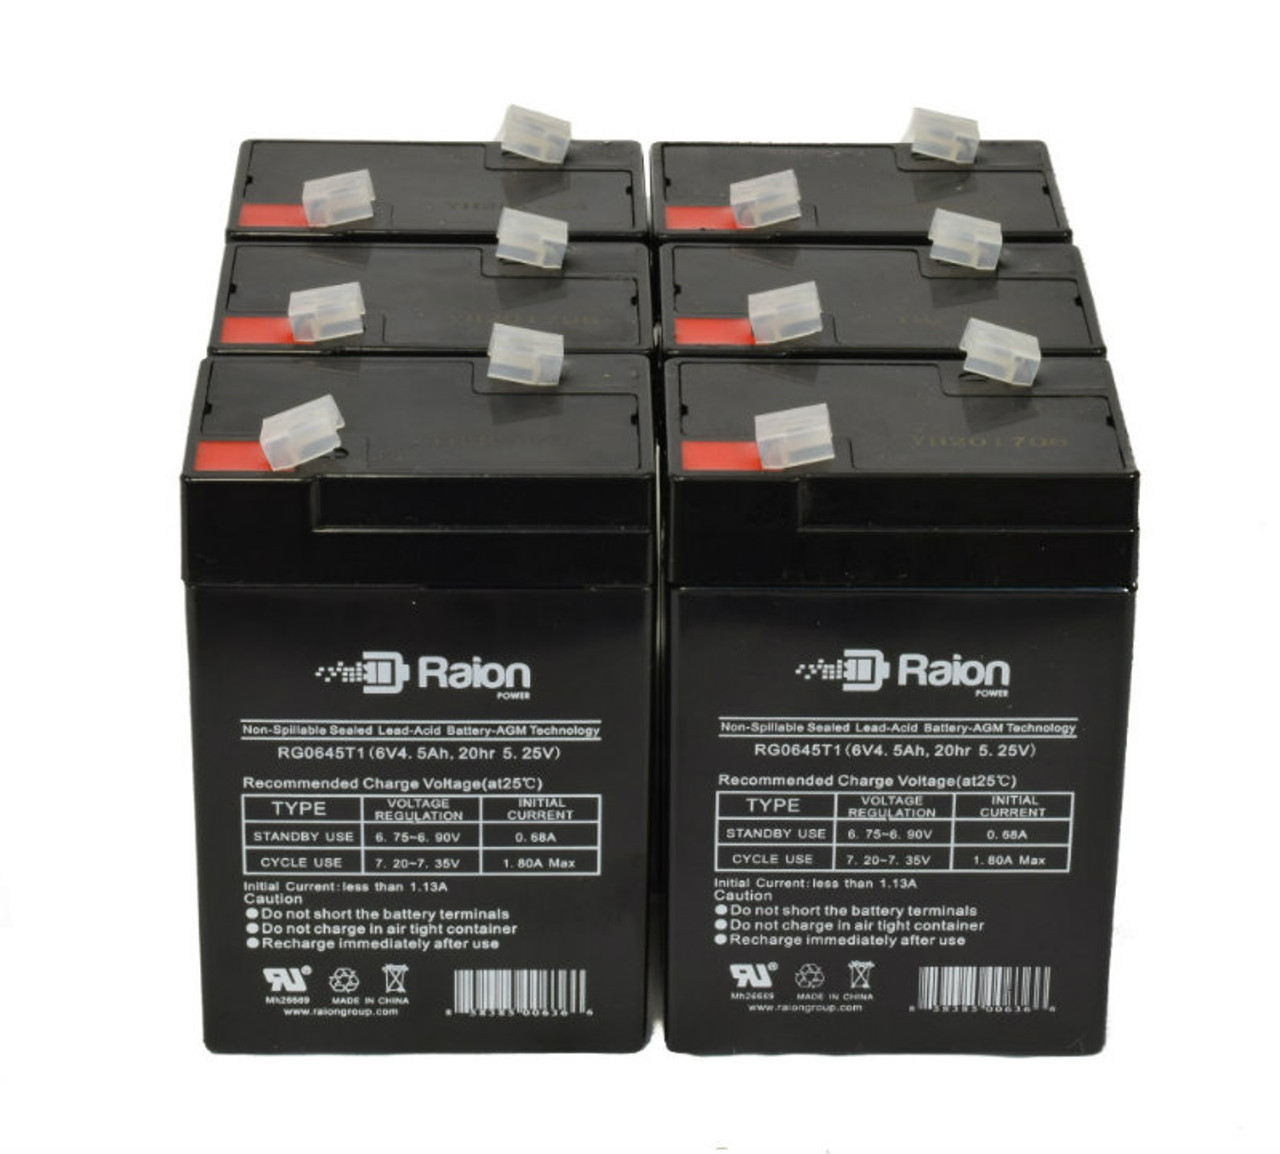 Raion Power 6 Volt 4.5Ah RG0645T1 Replacement Battery for BB BP4-6 - 6 Pack